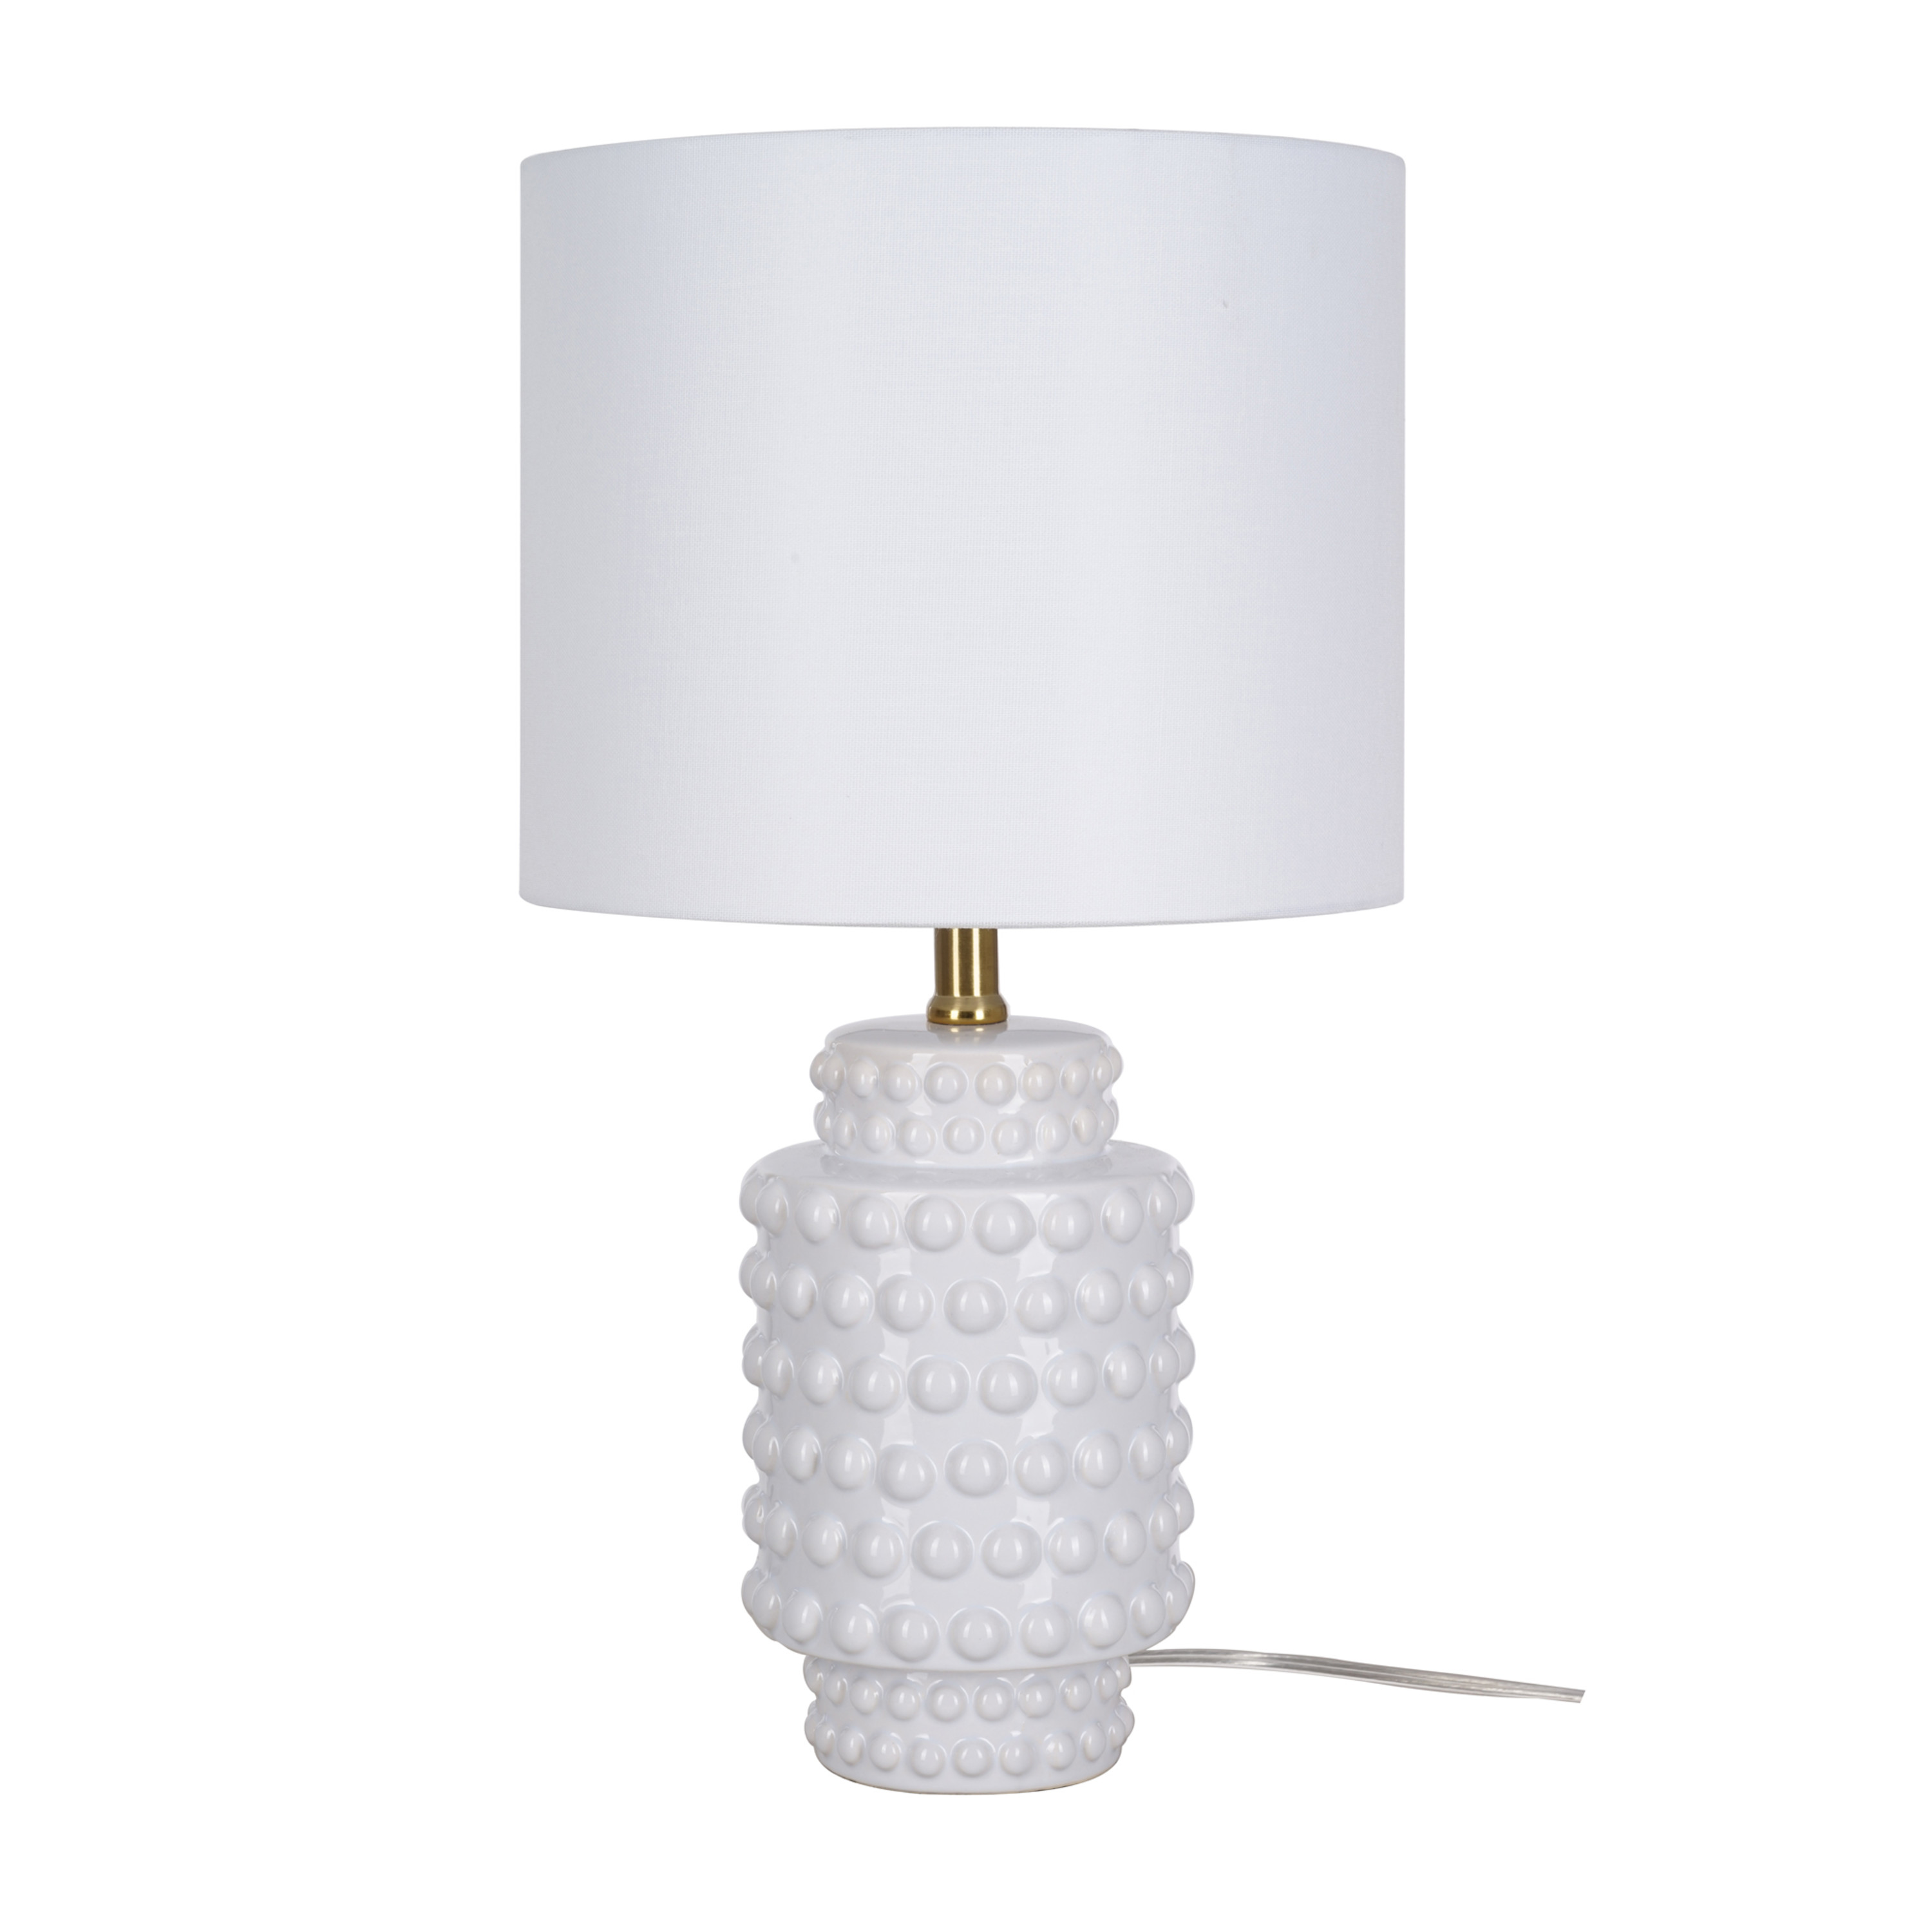 My Texas House 21" Hob-Nail Ceramic Table Lamp, Brass Accents, White Finish - image 2 of 8